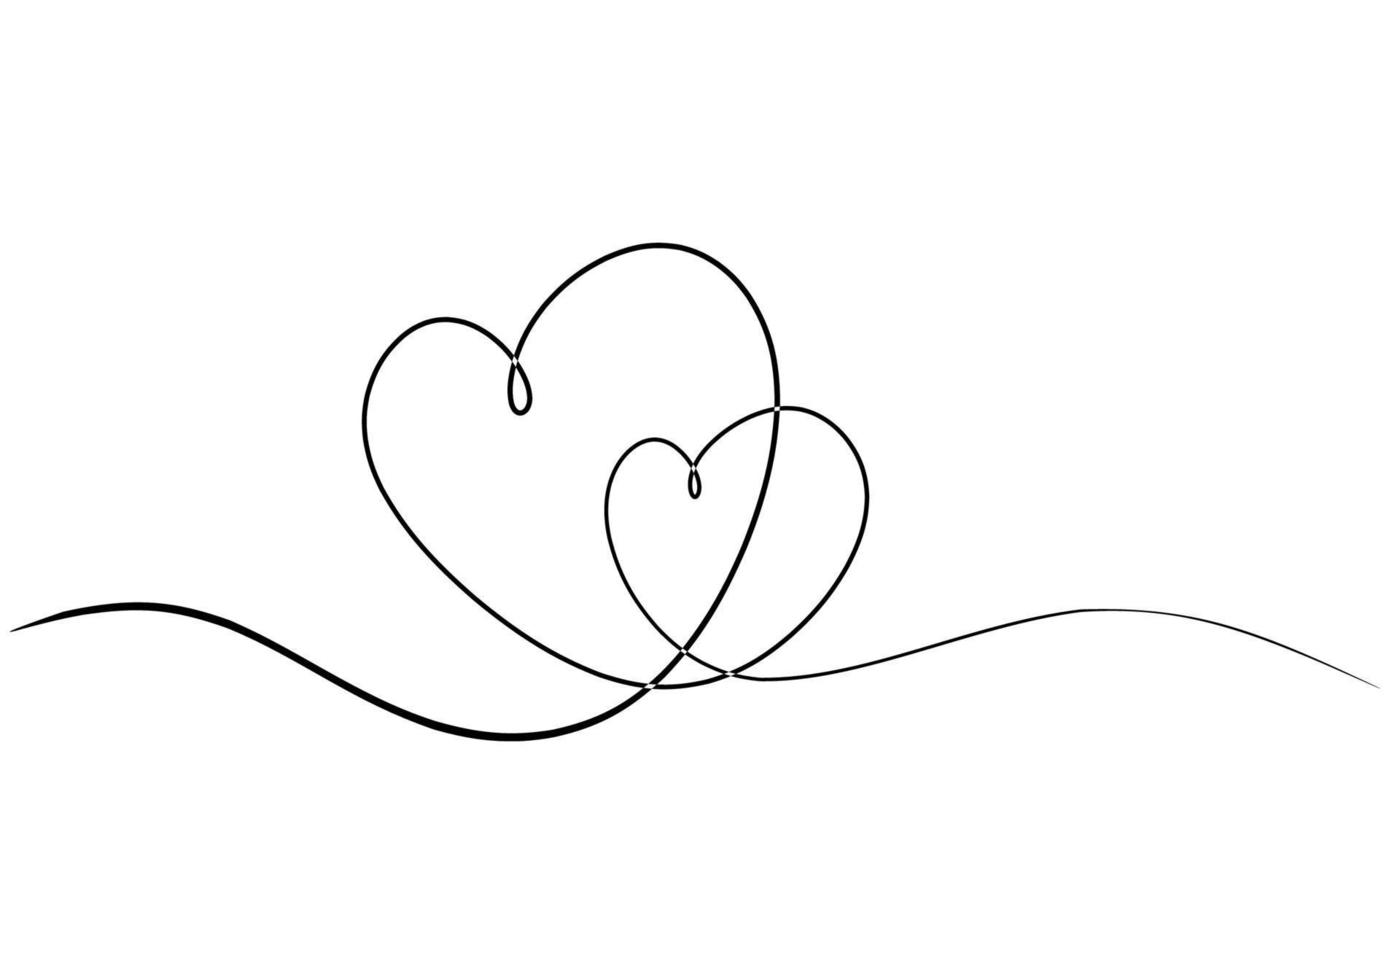 Heart line drawing, couple romantic symbol with one continuous line. vector